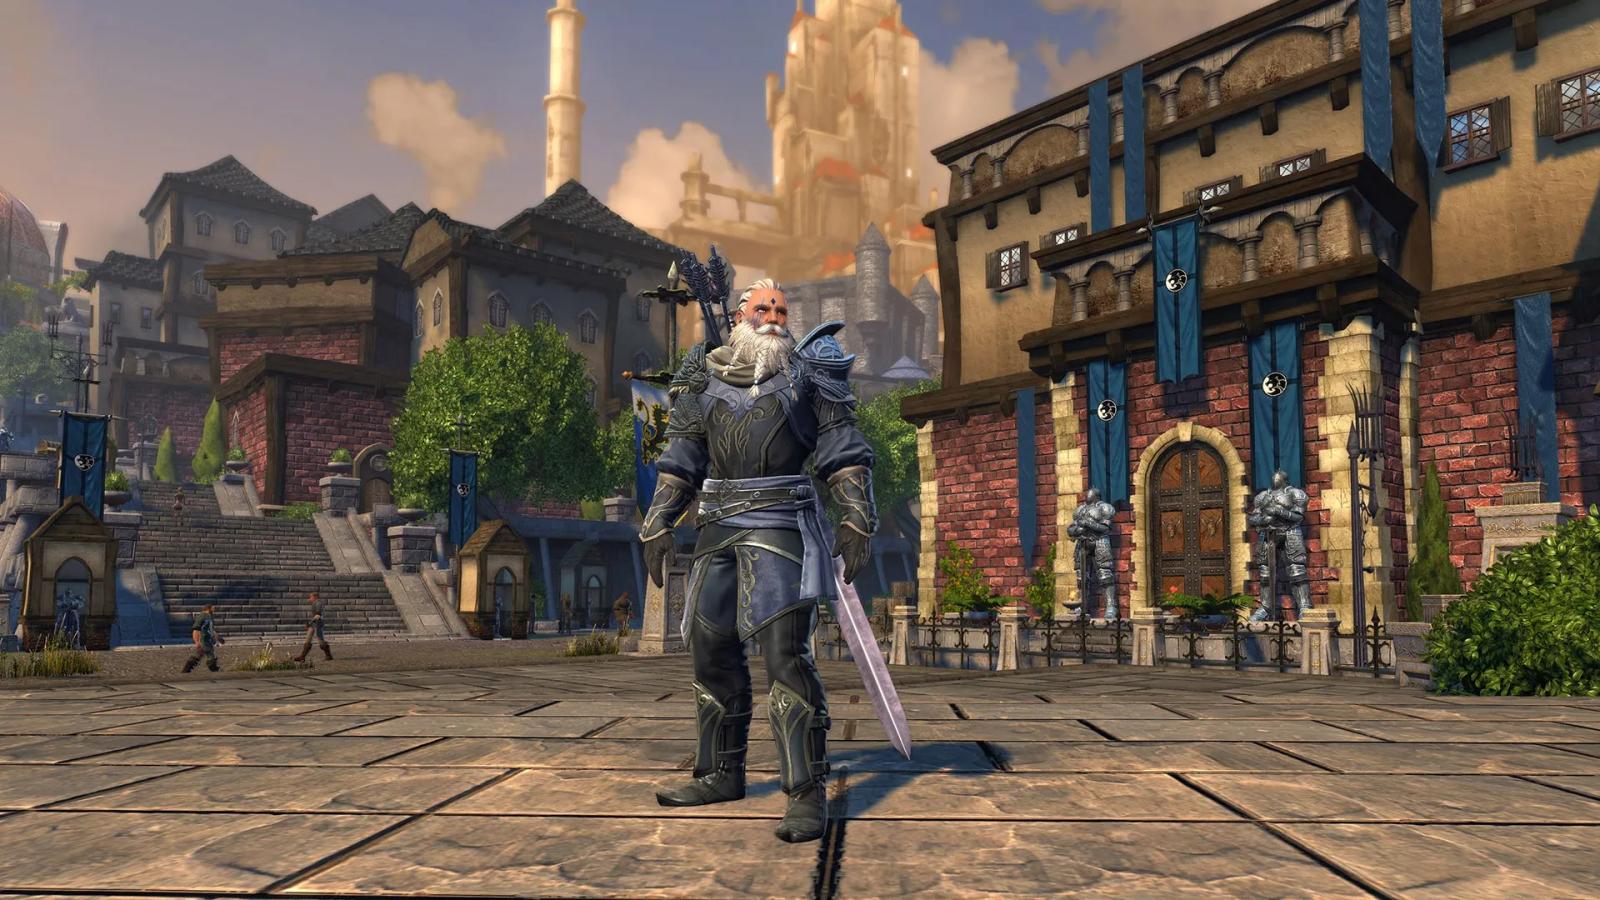 Image of a fantasy character standing in a town square in Neverwinter.